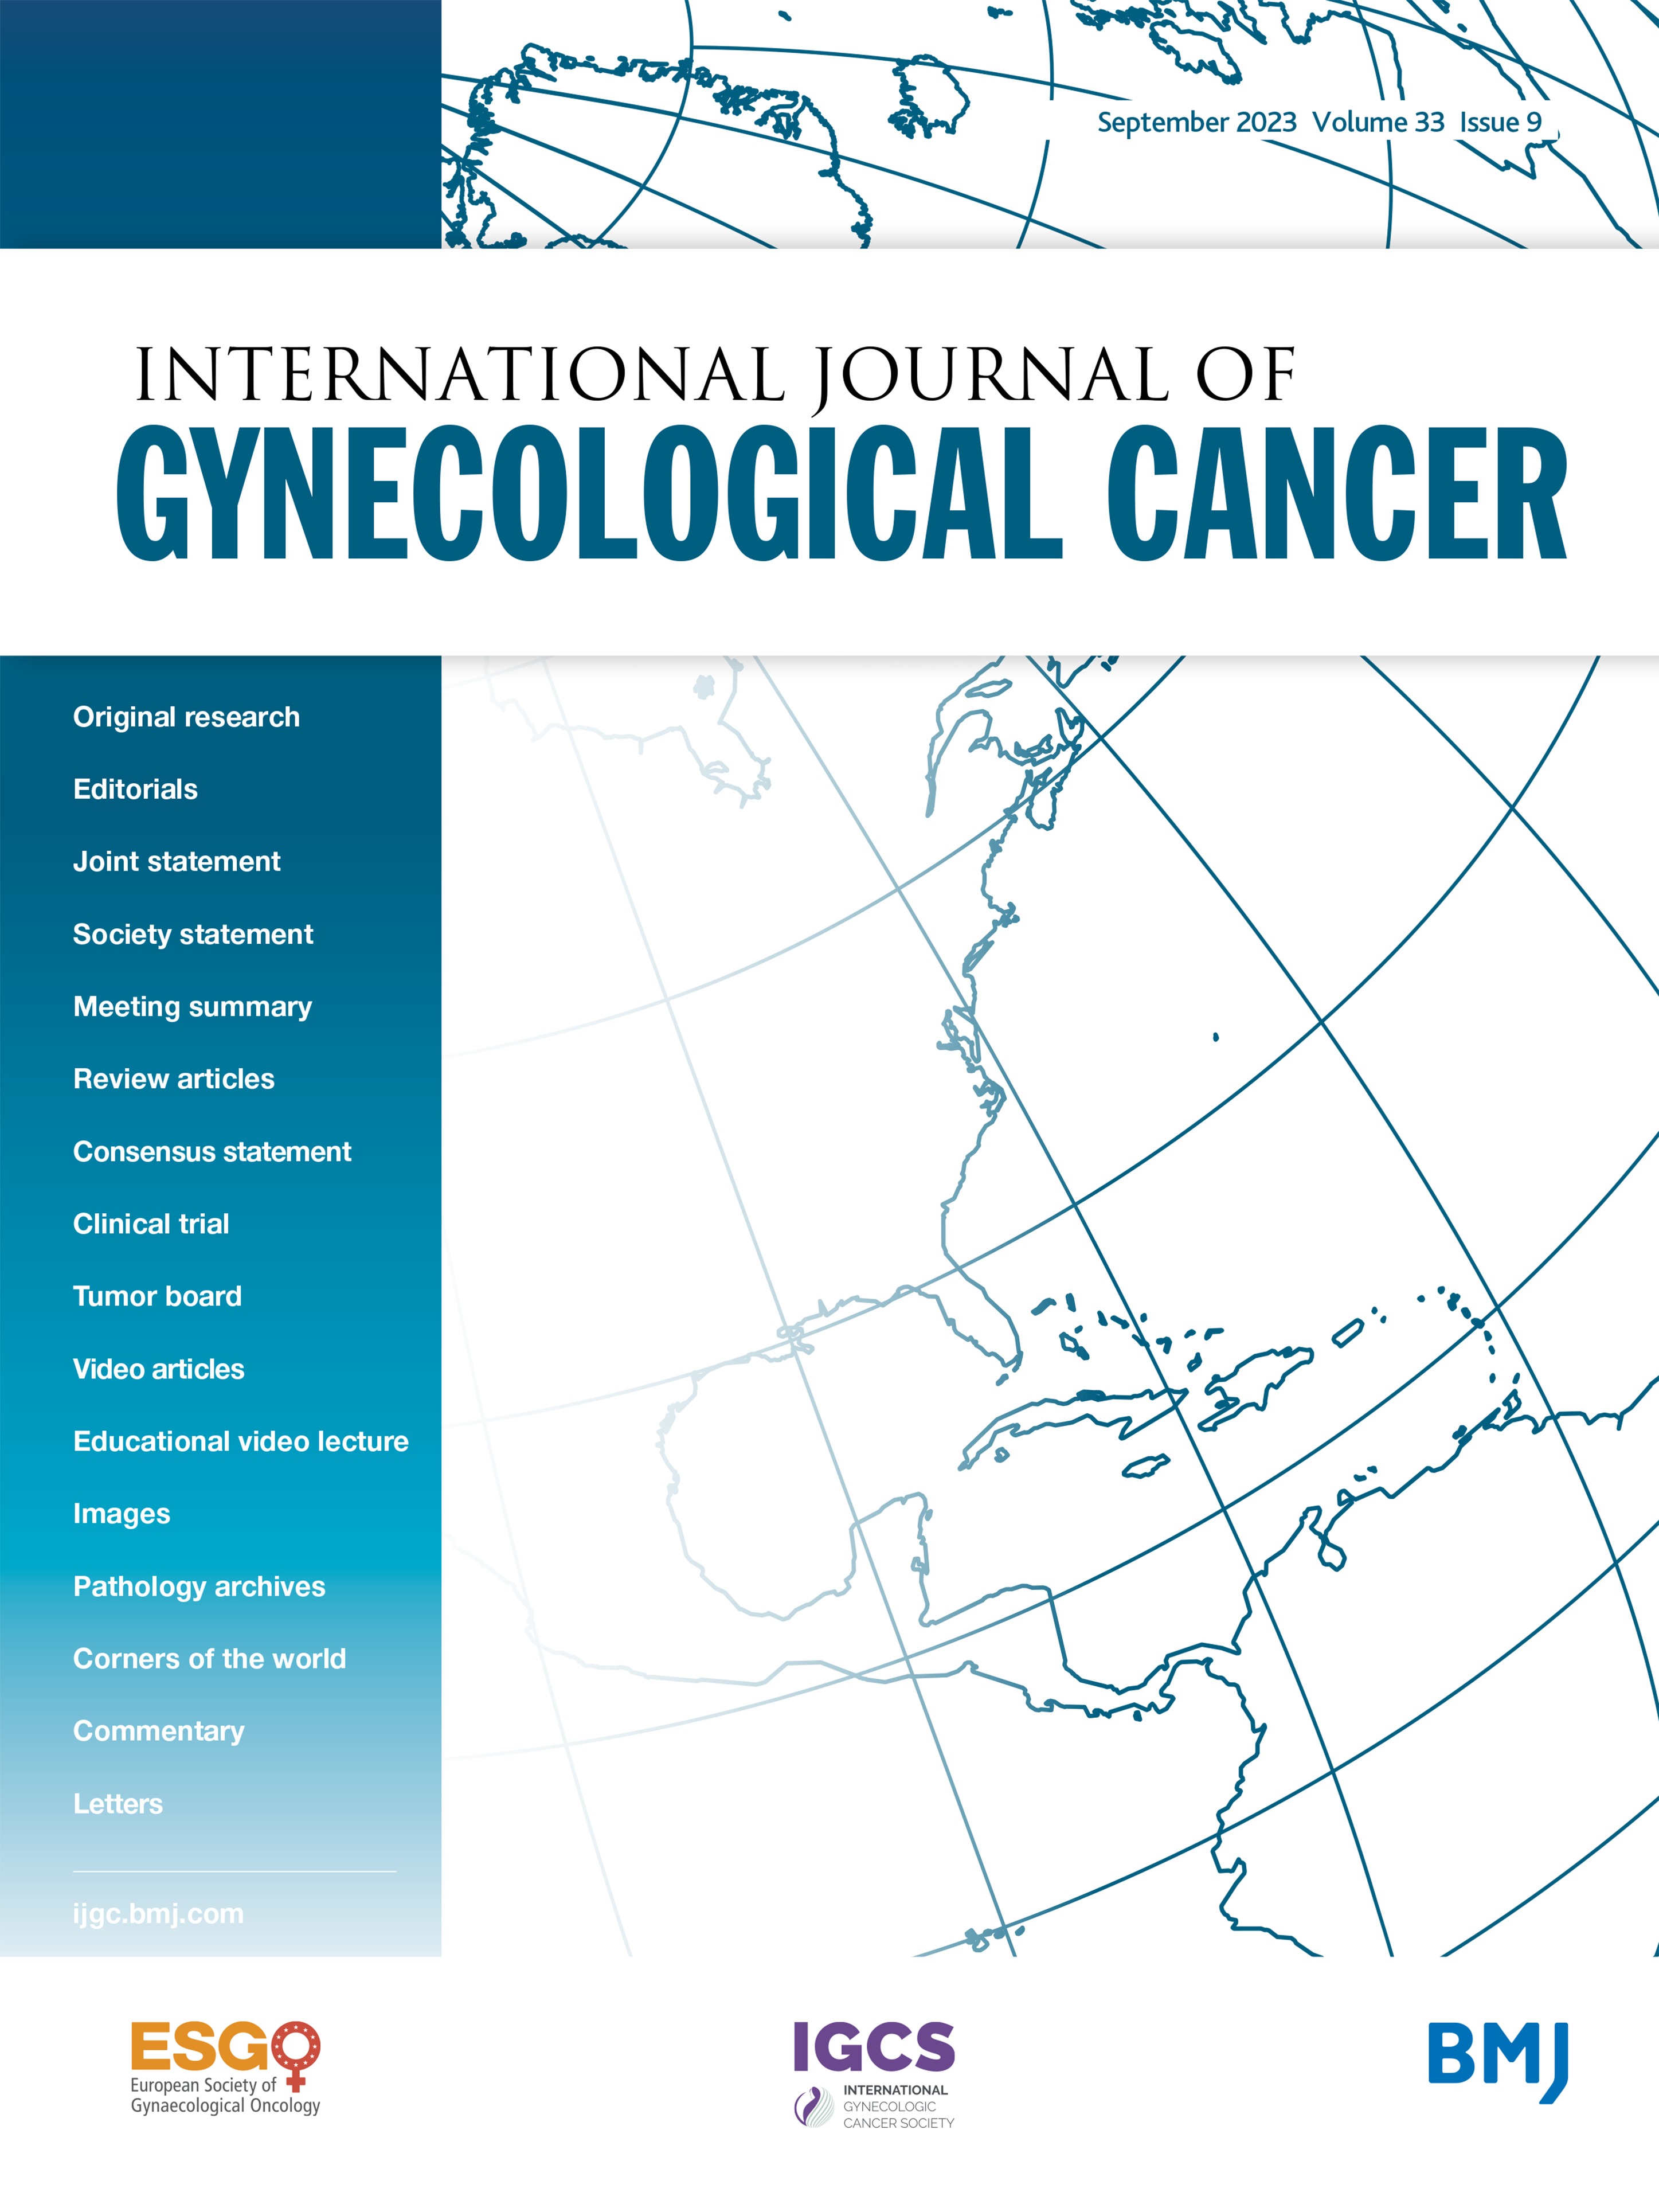 Trends in use of radiation therapy, chemotherapy, and combination chemoradiotherapy in advanced uterine cancer before, during, and after GOG 258